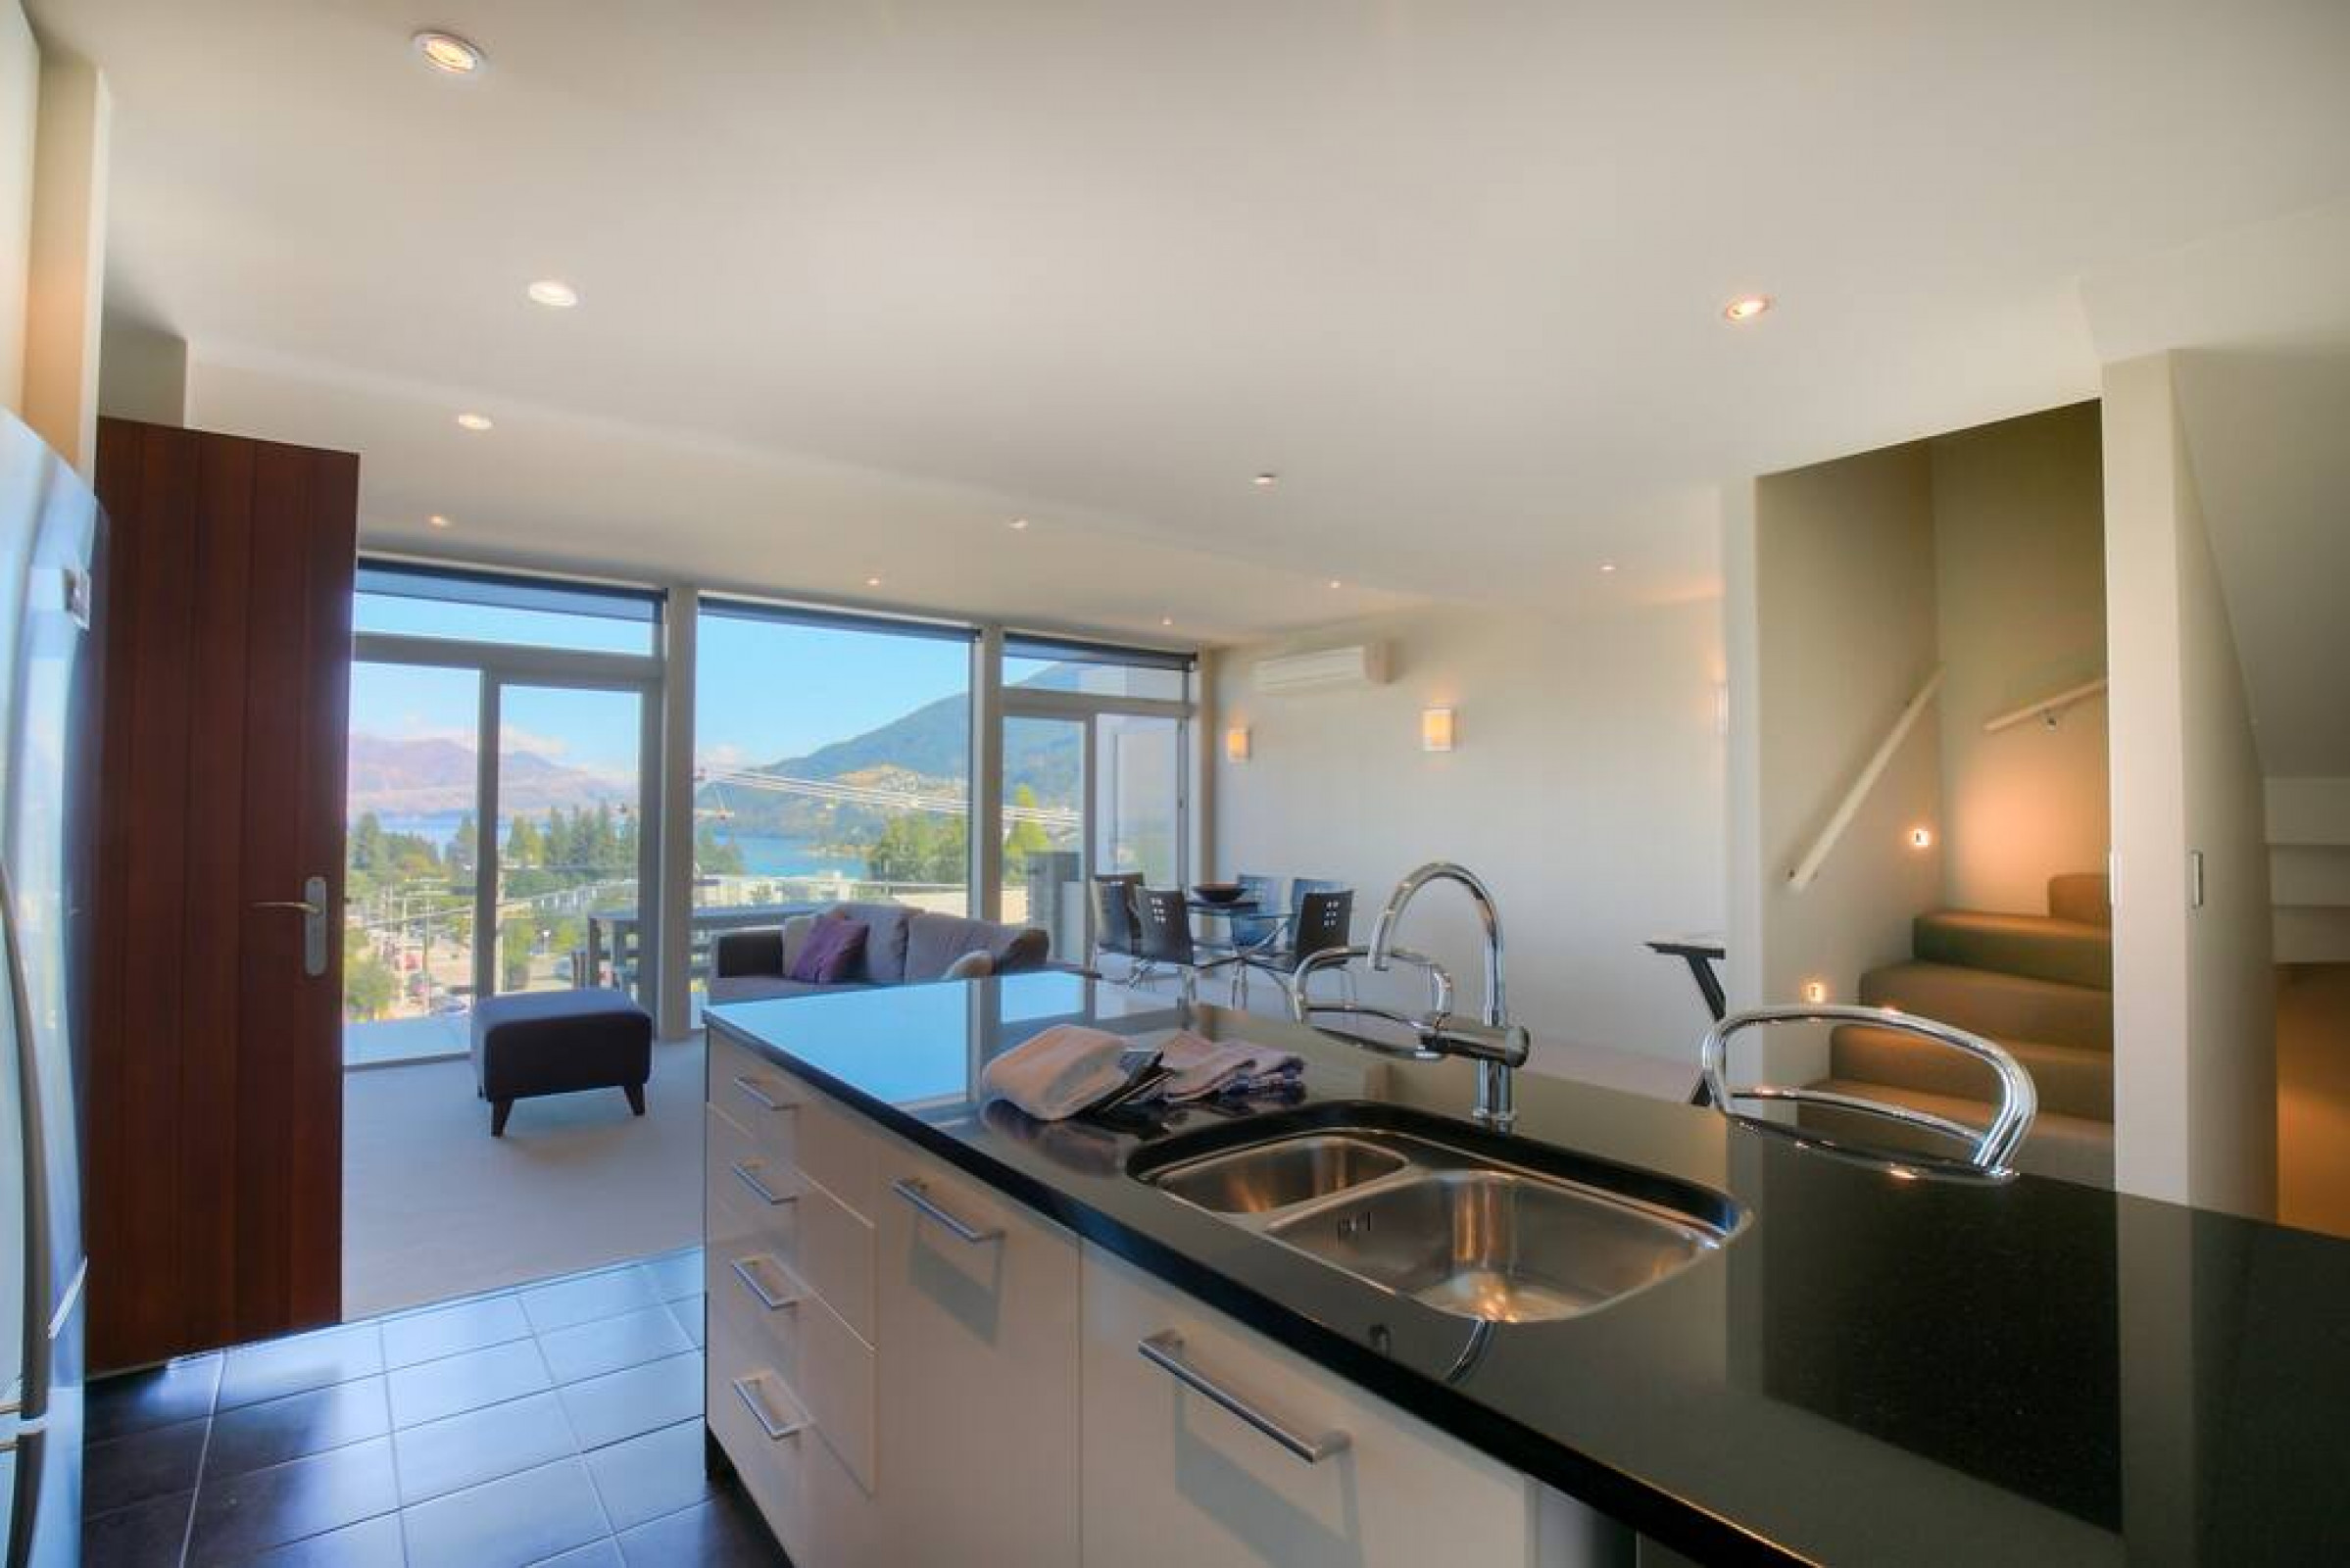 Property Image 2 - Modern Apartment with Balcony Overlooking Queenstown Bay